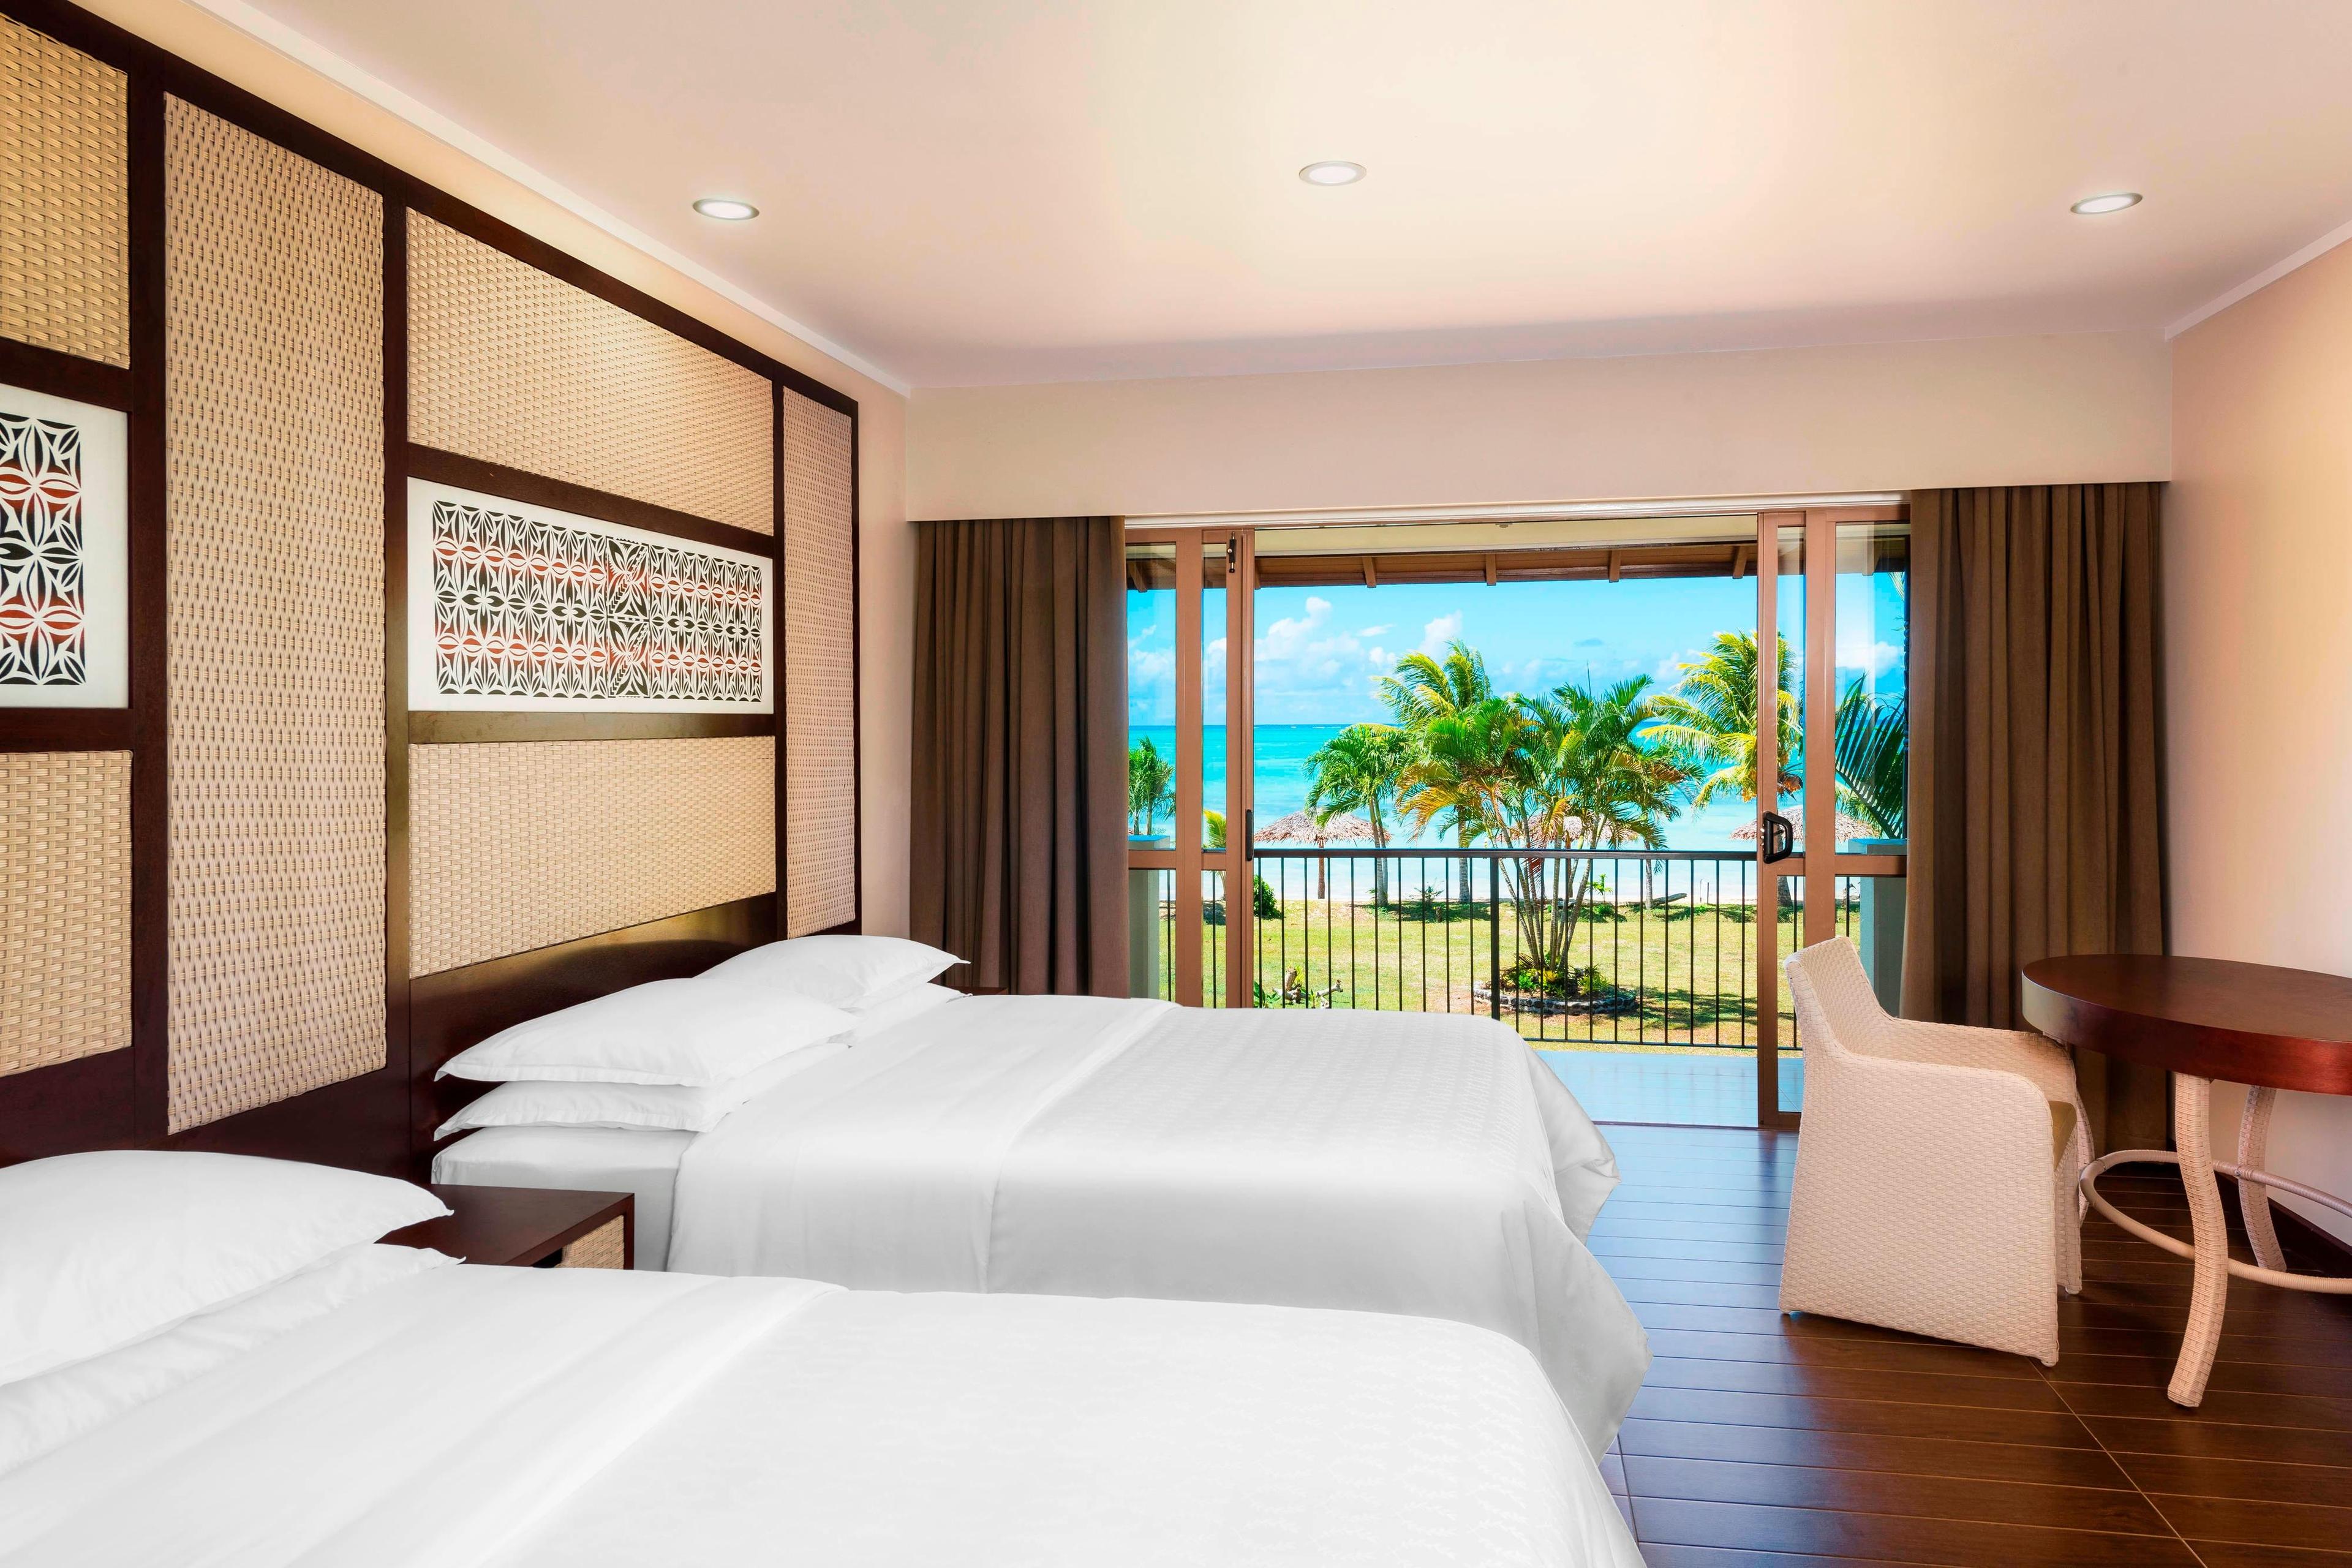 Equipped with the comfortable Sheraton Signature Sleep Experience®, our spacious Deluxe Ocean View Twin room provides a comfortable accommodation for multiple guests in Samoa.